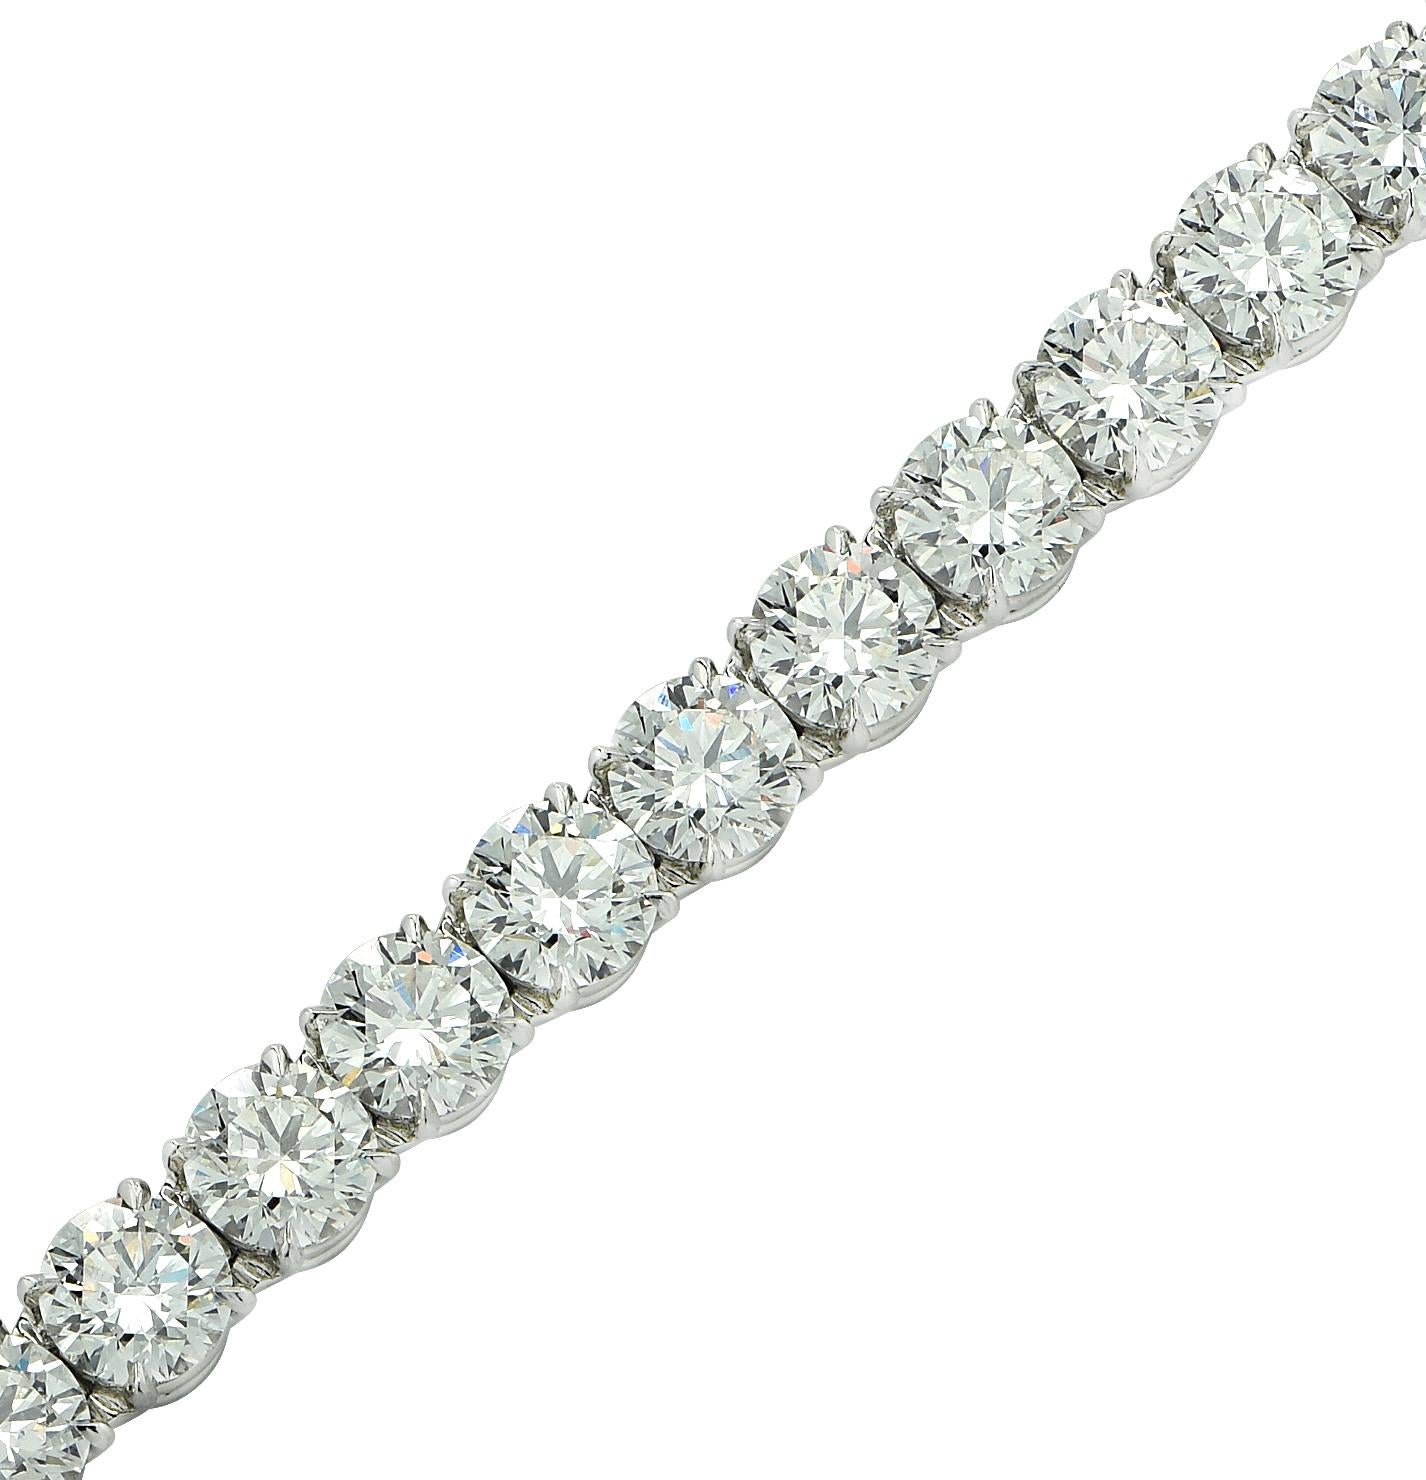 Spectacular bracelet hand crafted in platinum, featuring 26 sensational GIA certified round brilliant cut diamonds weighing 26.78 carats total, H color, VS2 clarity. Each GIA certified diamond was carefully selected, perfectly matched and set in an